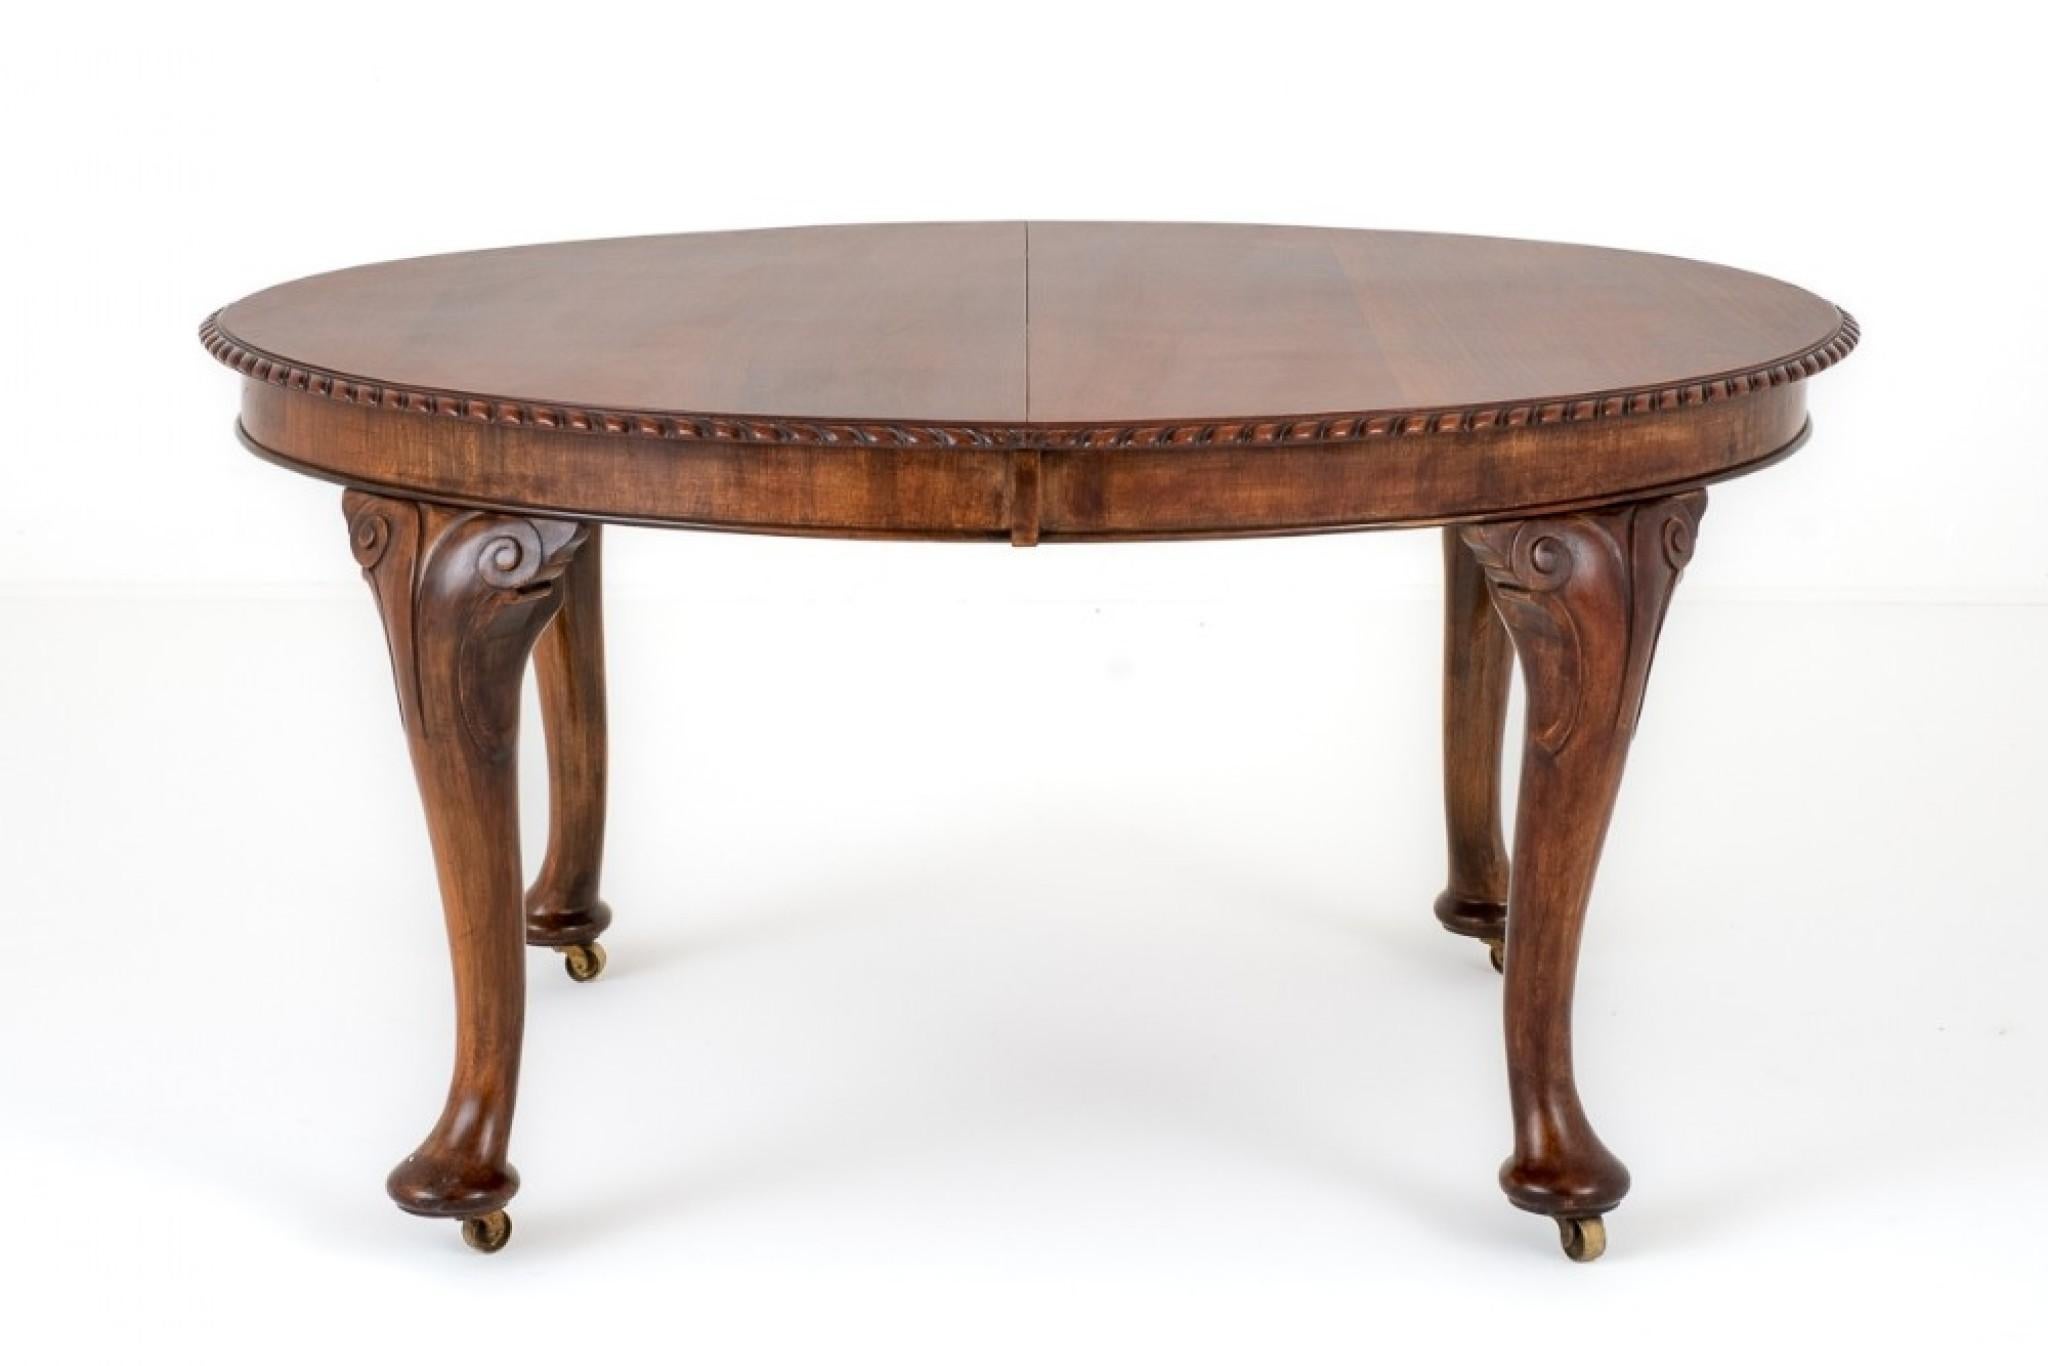 Late Victorian Oval Mahogany Extending Dining Table.
This Table Stands upon Cabriole Legs with Brass Castors.
The Knees Being of a Carved Form.
circa 1900
The Table Extends by way of a Telescopic Wind Out Action (note the brass plaque Samuel